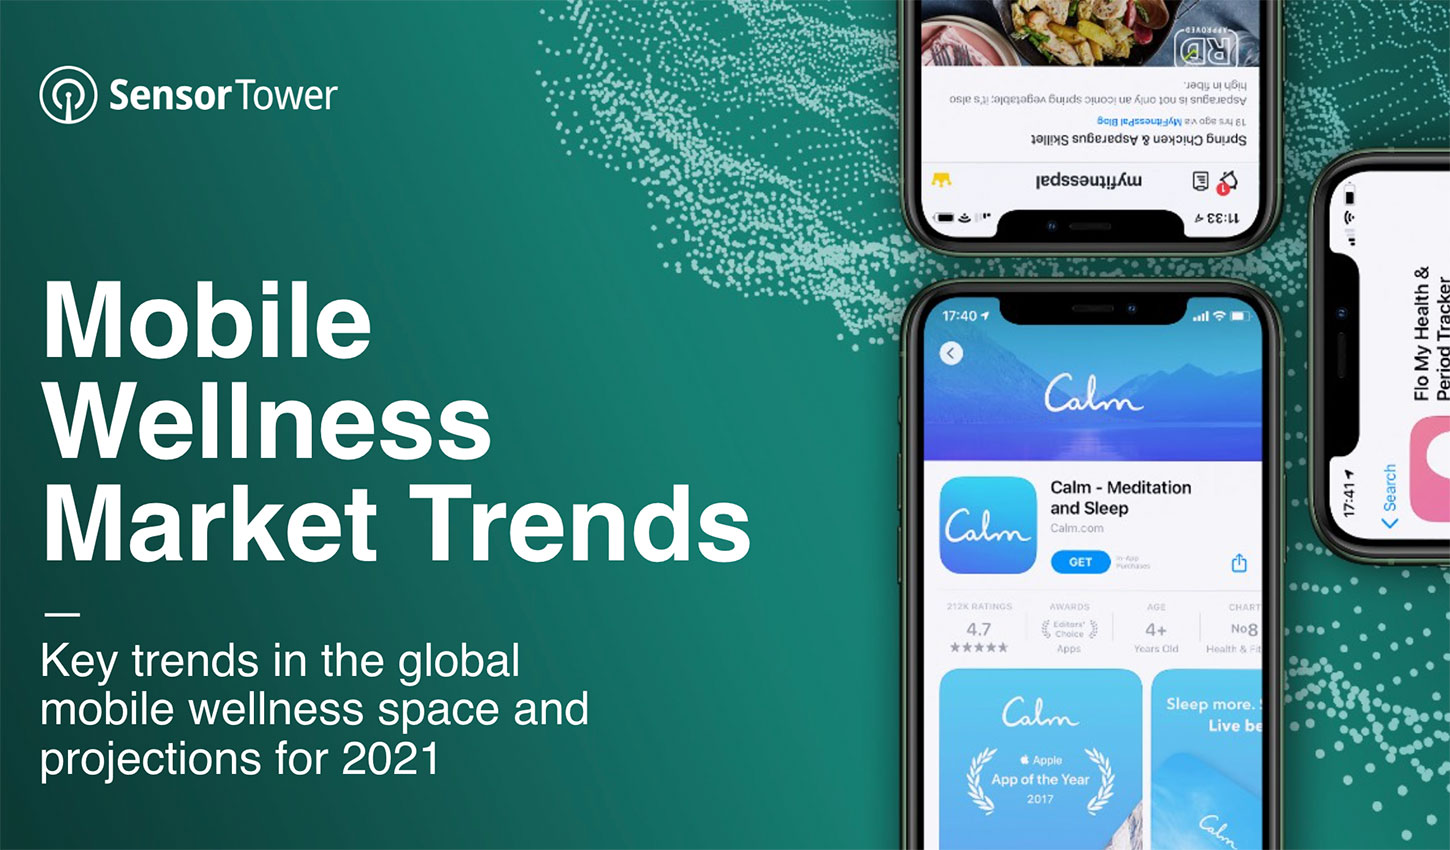 Sensor Tower's Mobile Wellness Market Trends report analyzes last year's trends and forecasts 2021 performance of wellness apps.